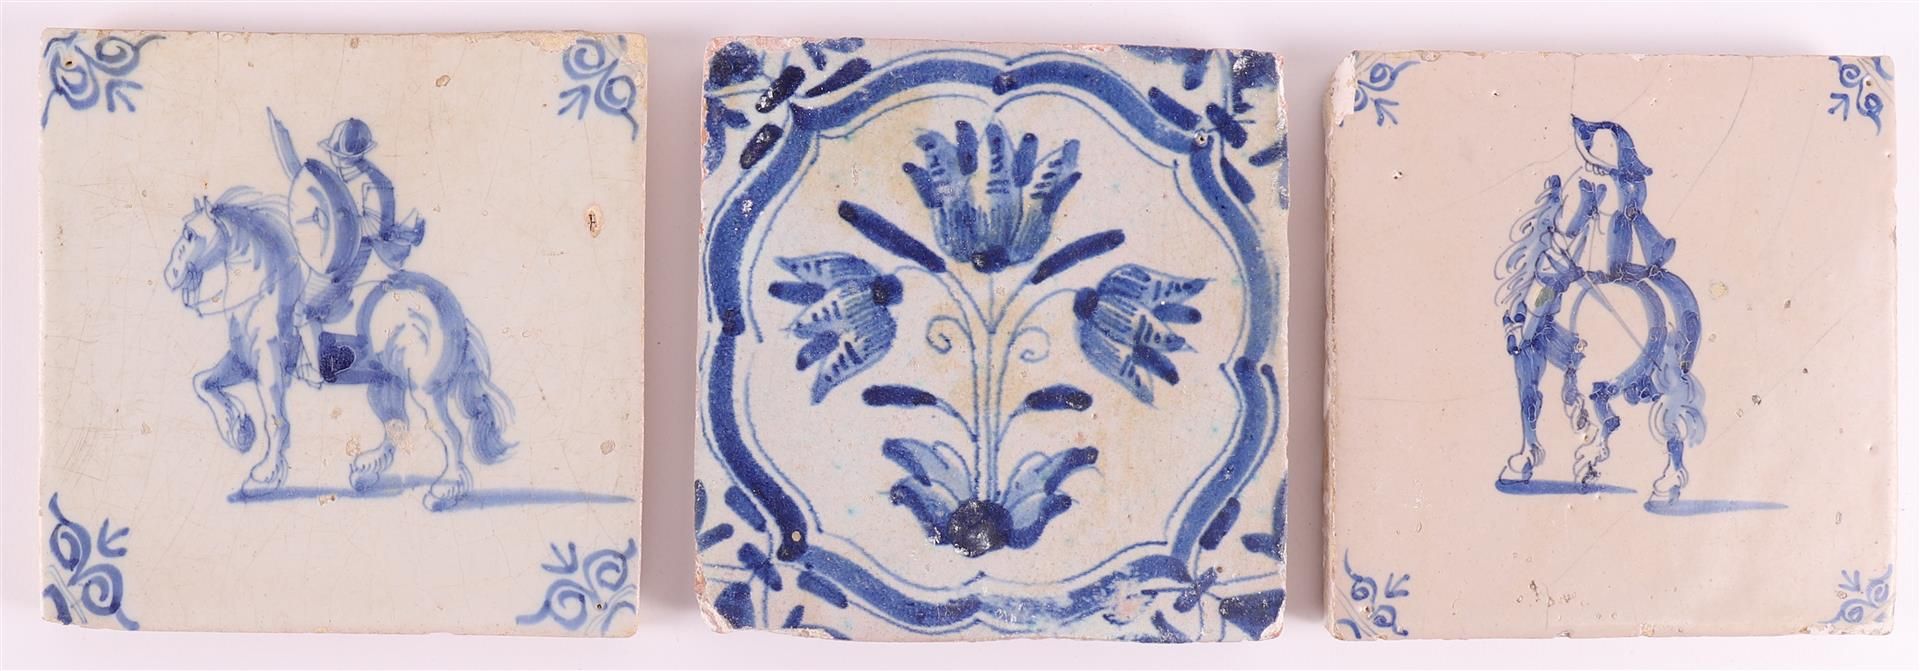 Two blue/white equestrian tiles with ox head corner motifs, Holland 17th century. Here is a flower